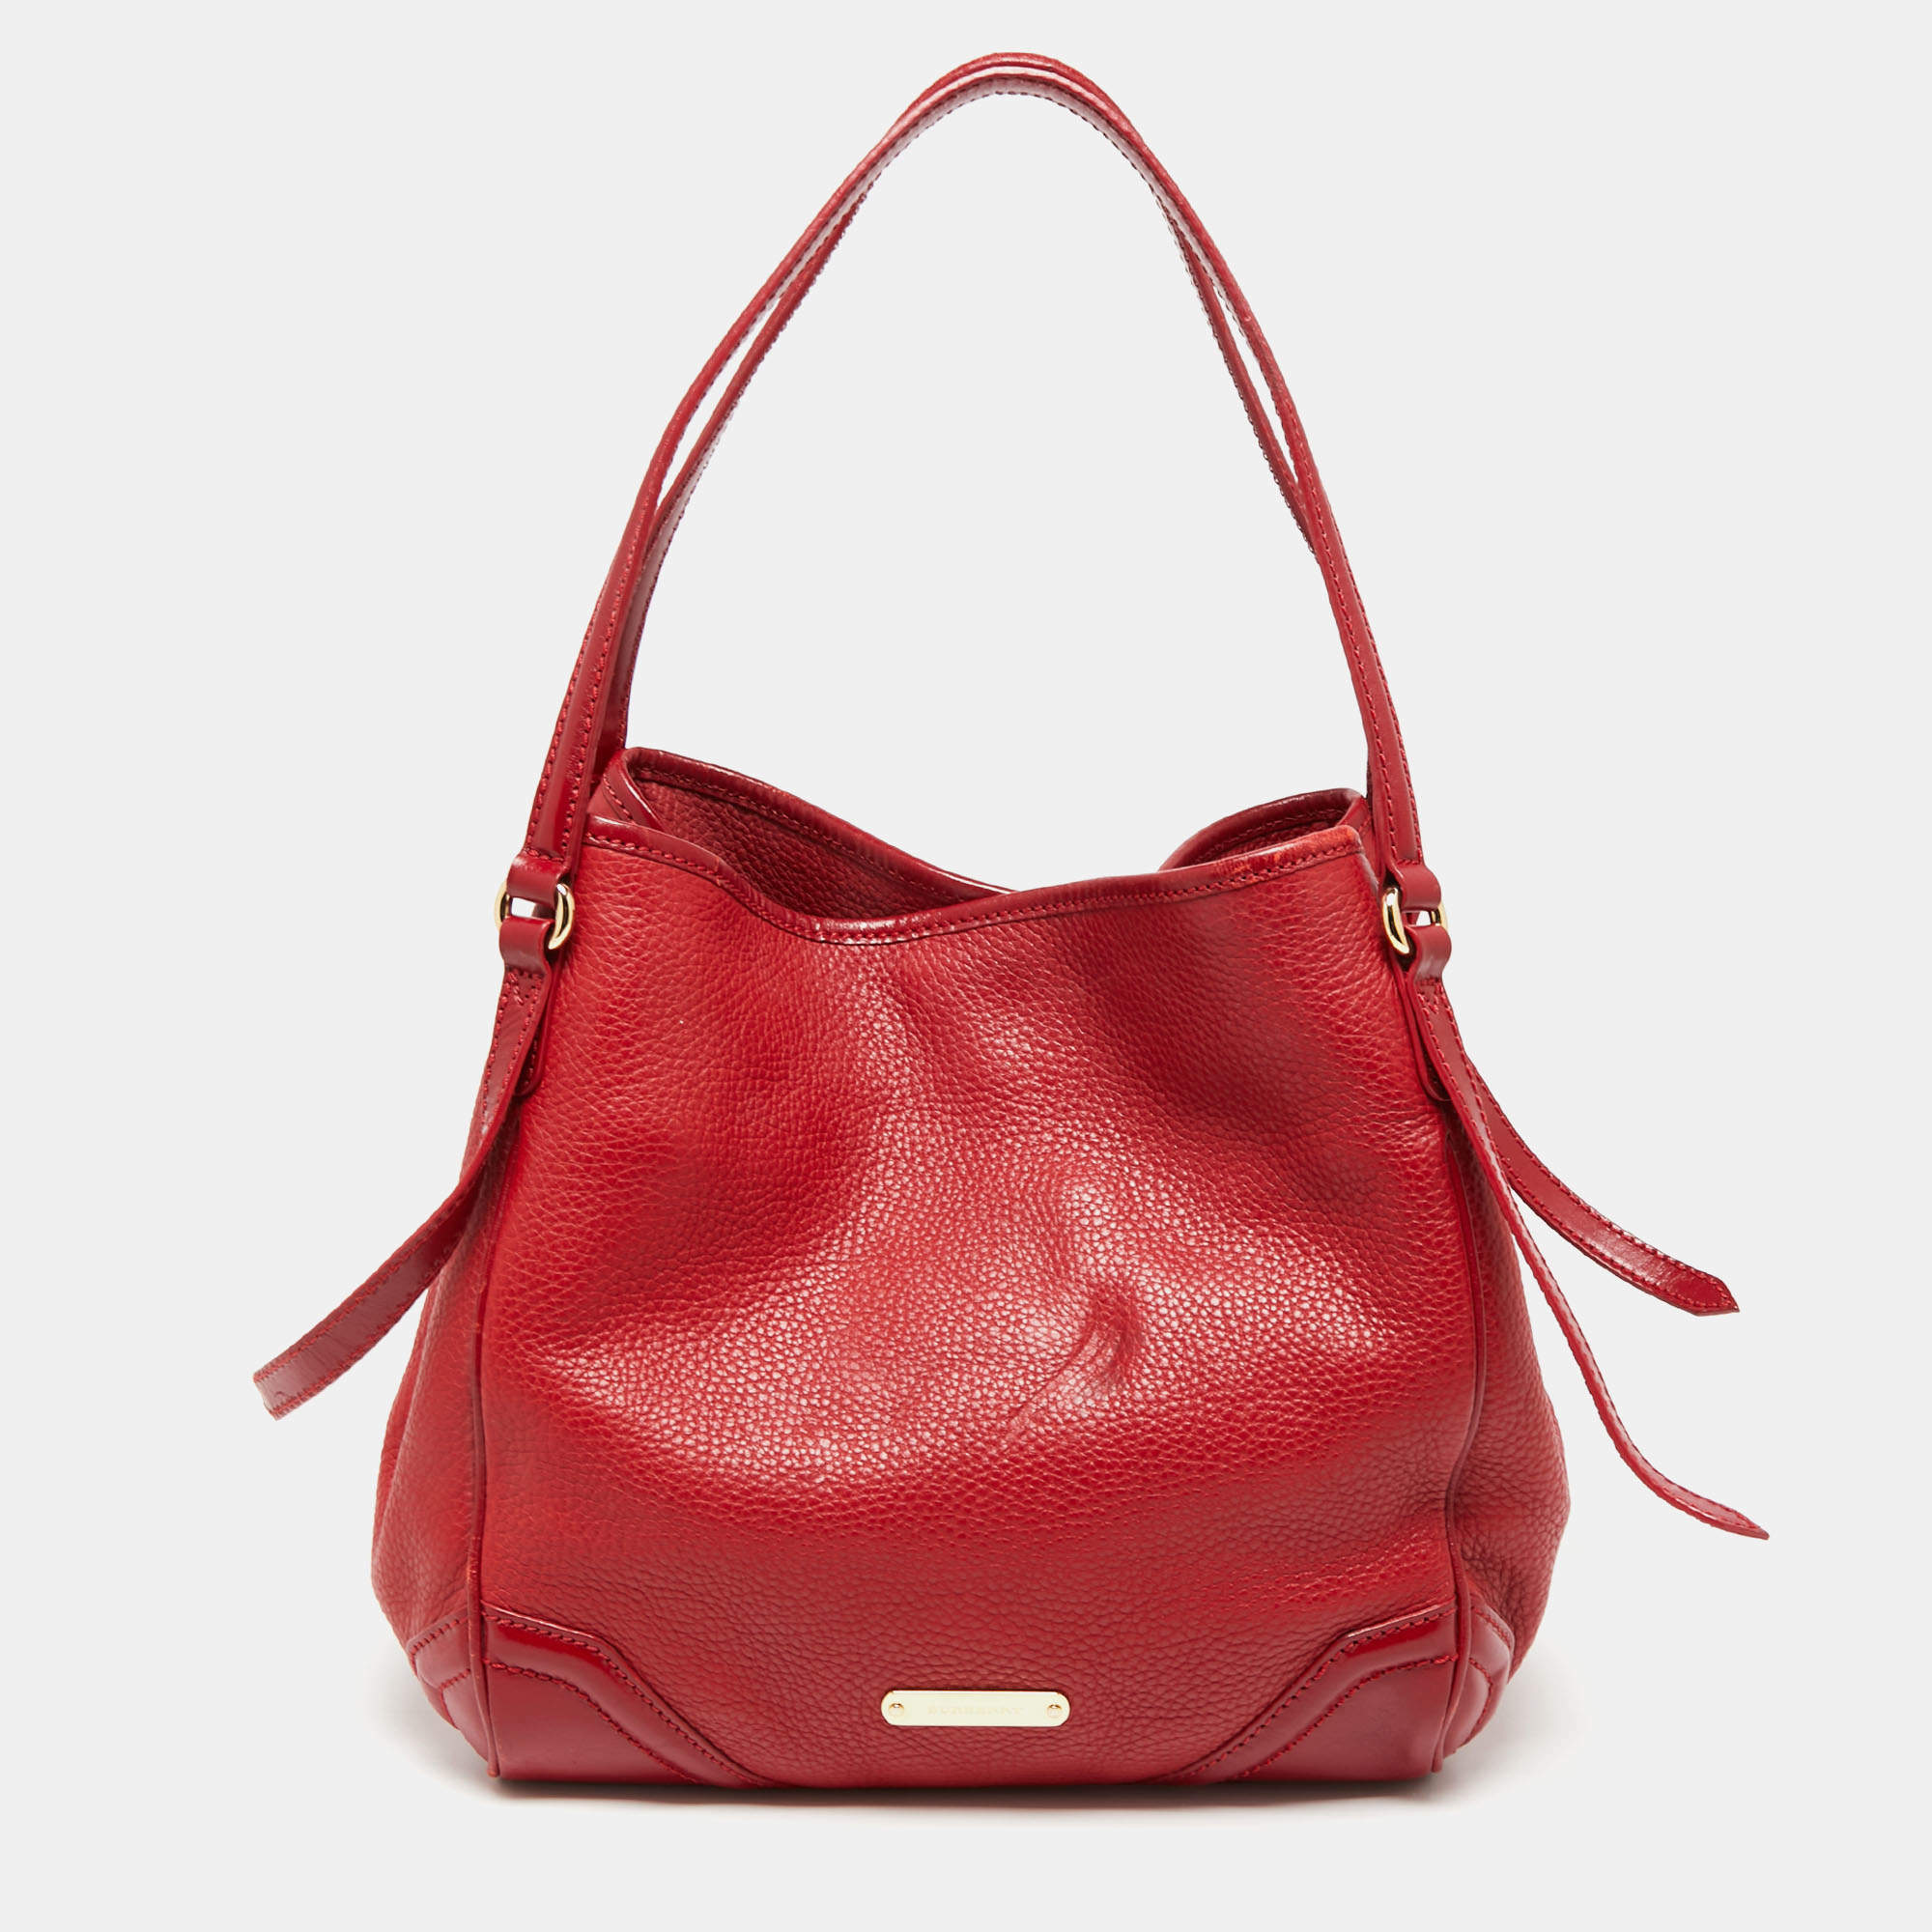 Burberry Red Leather Small Canterbury Tote